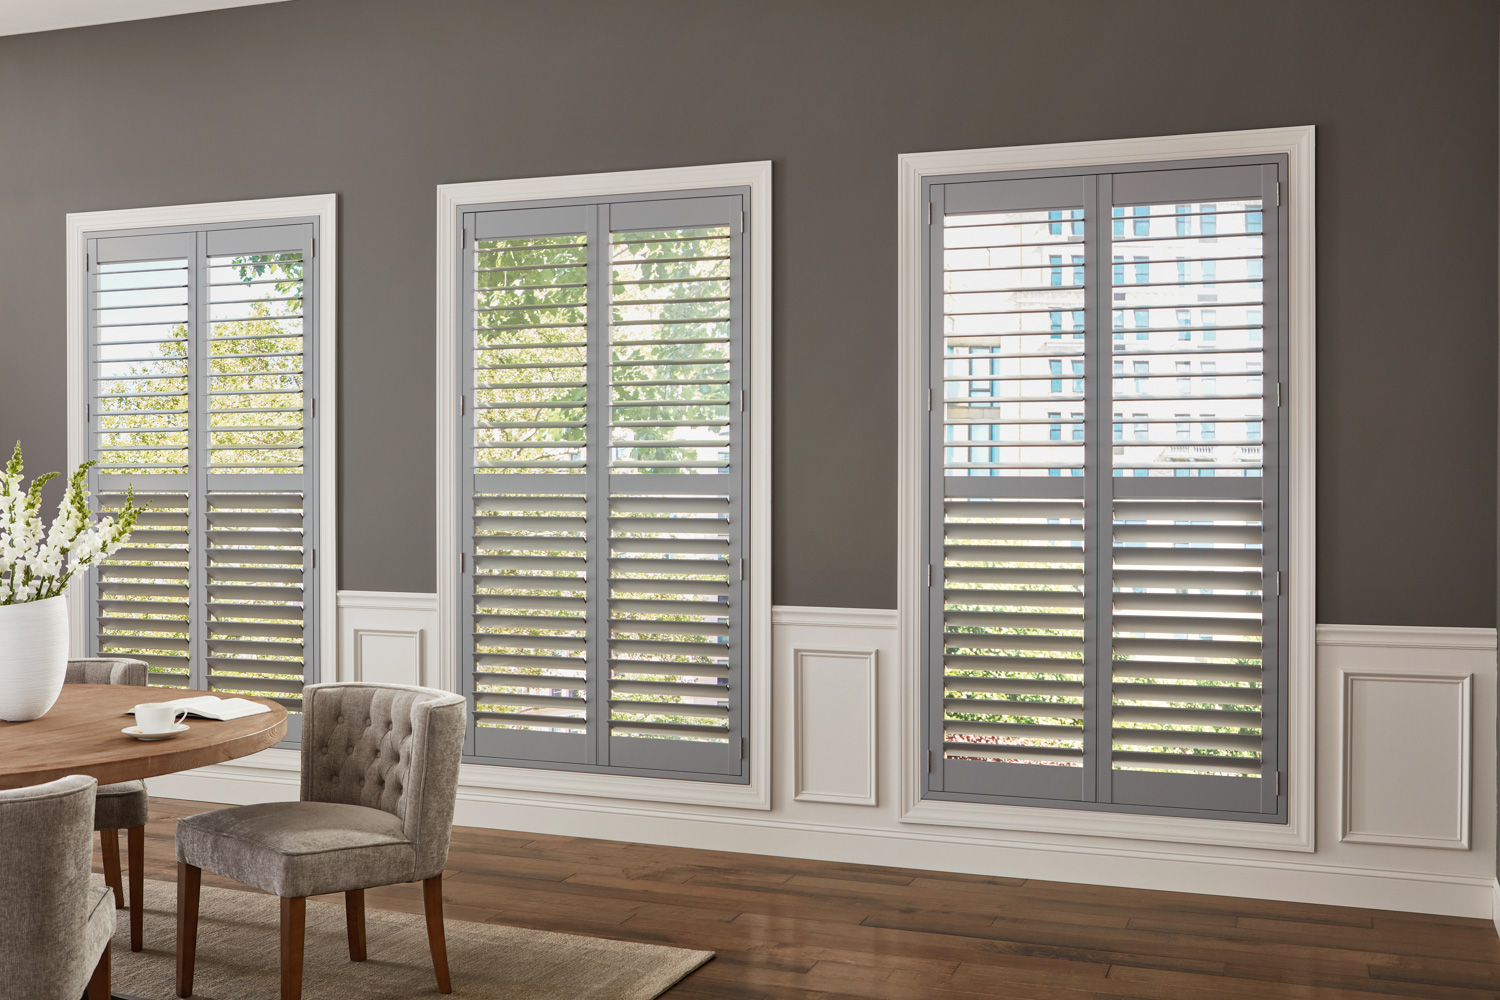 Stylish wood shutters in dining room.